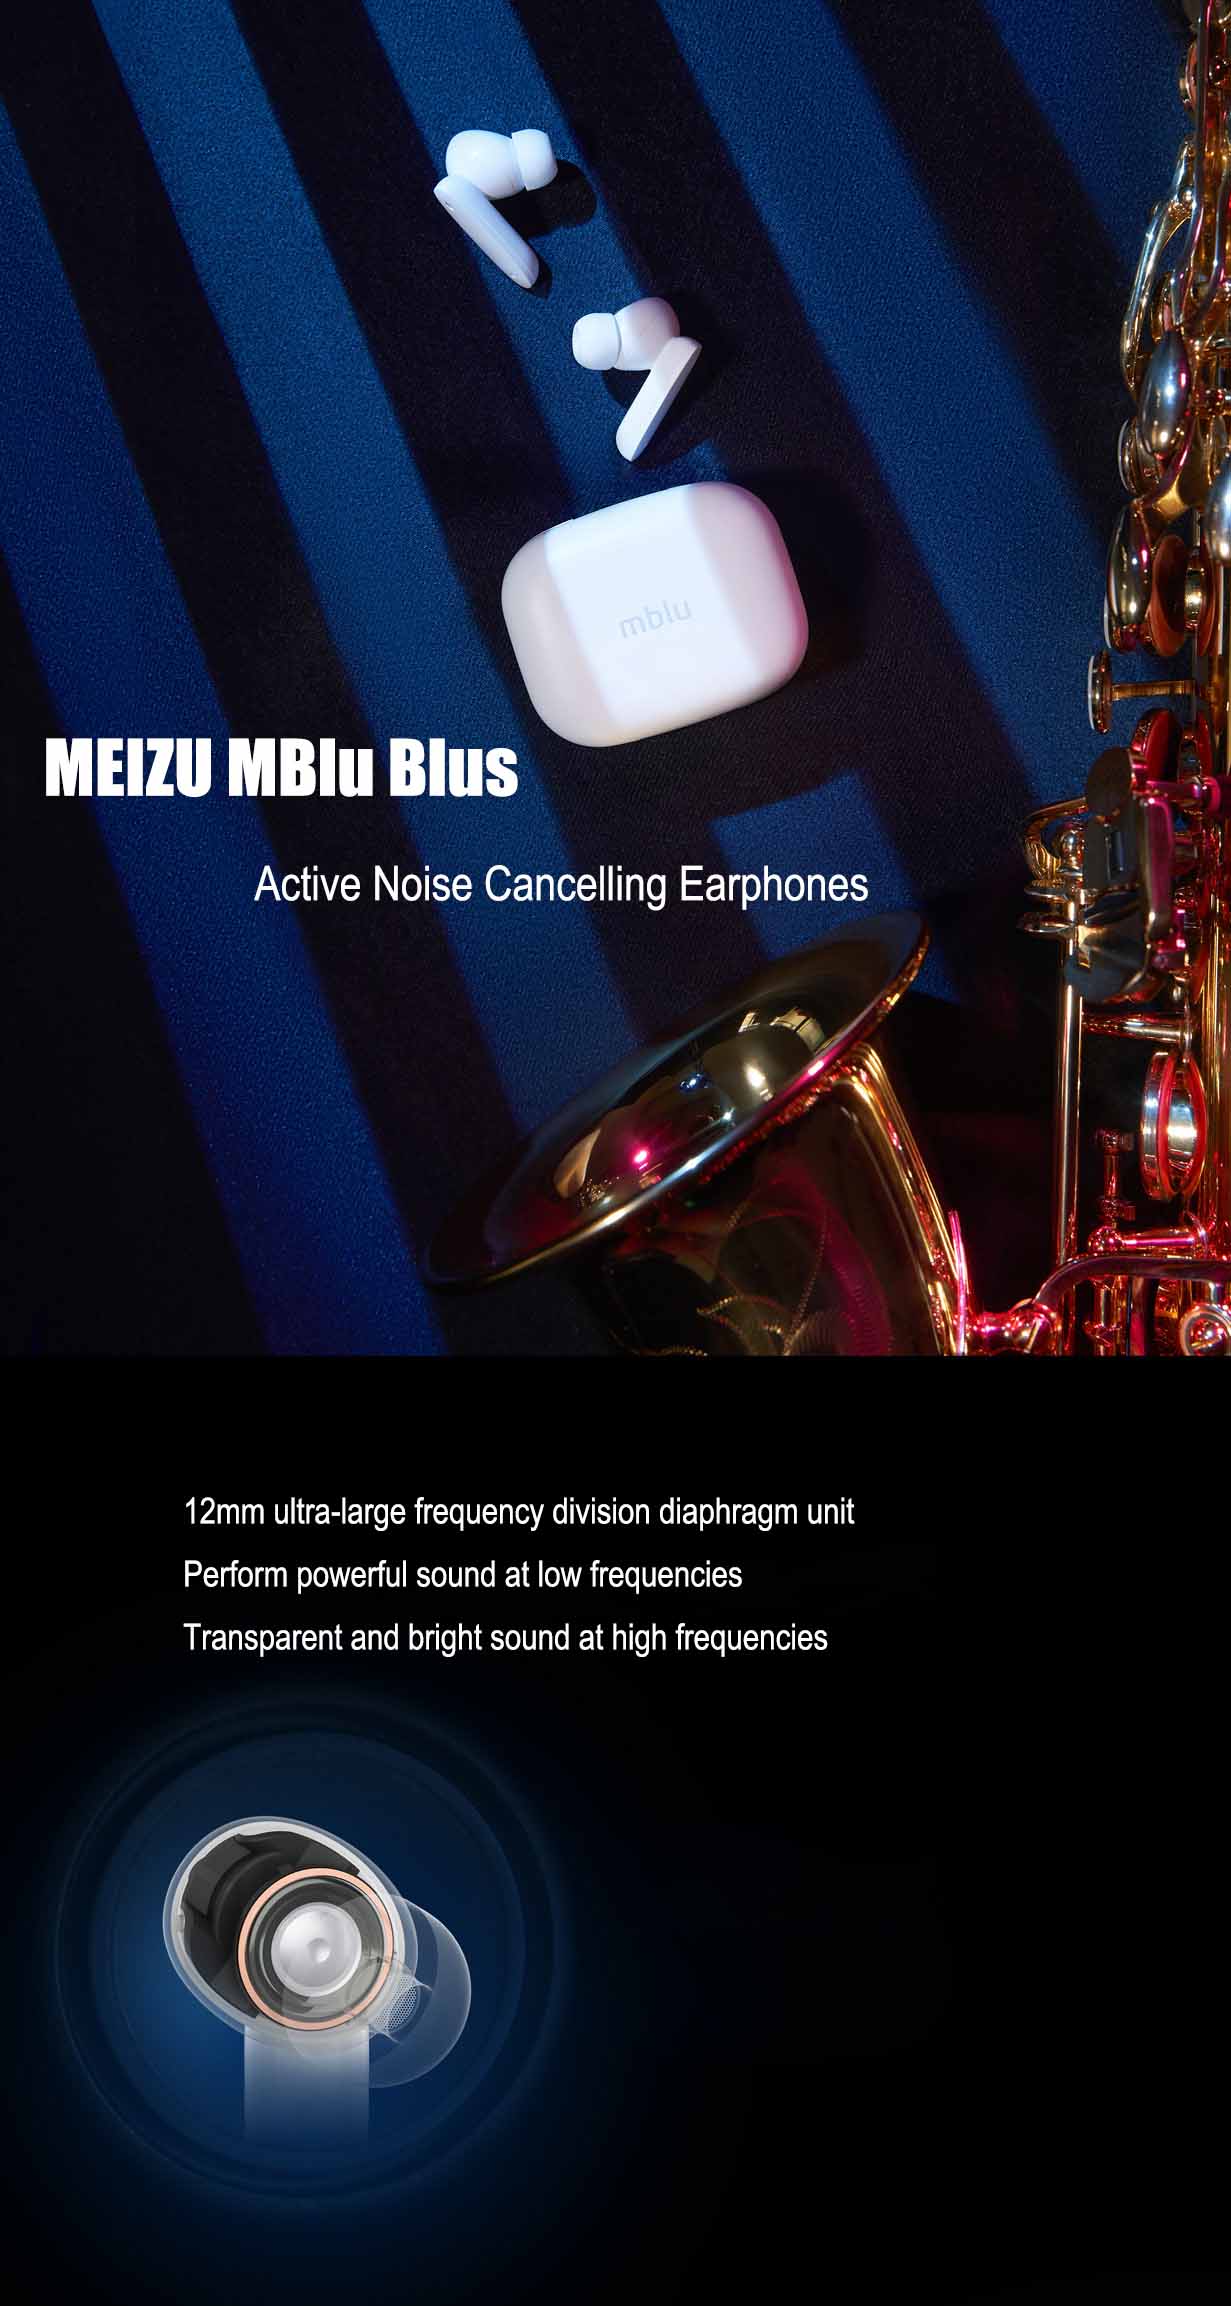 MEIZU Mblu Blus Active Noise Cancelling True Wireless Earbuds